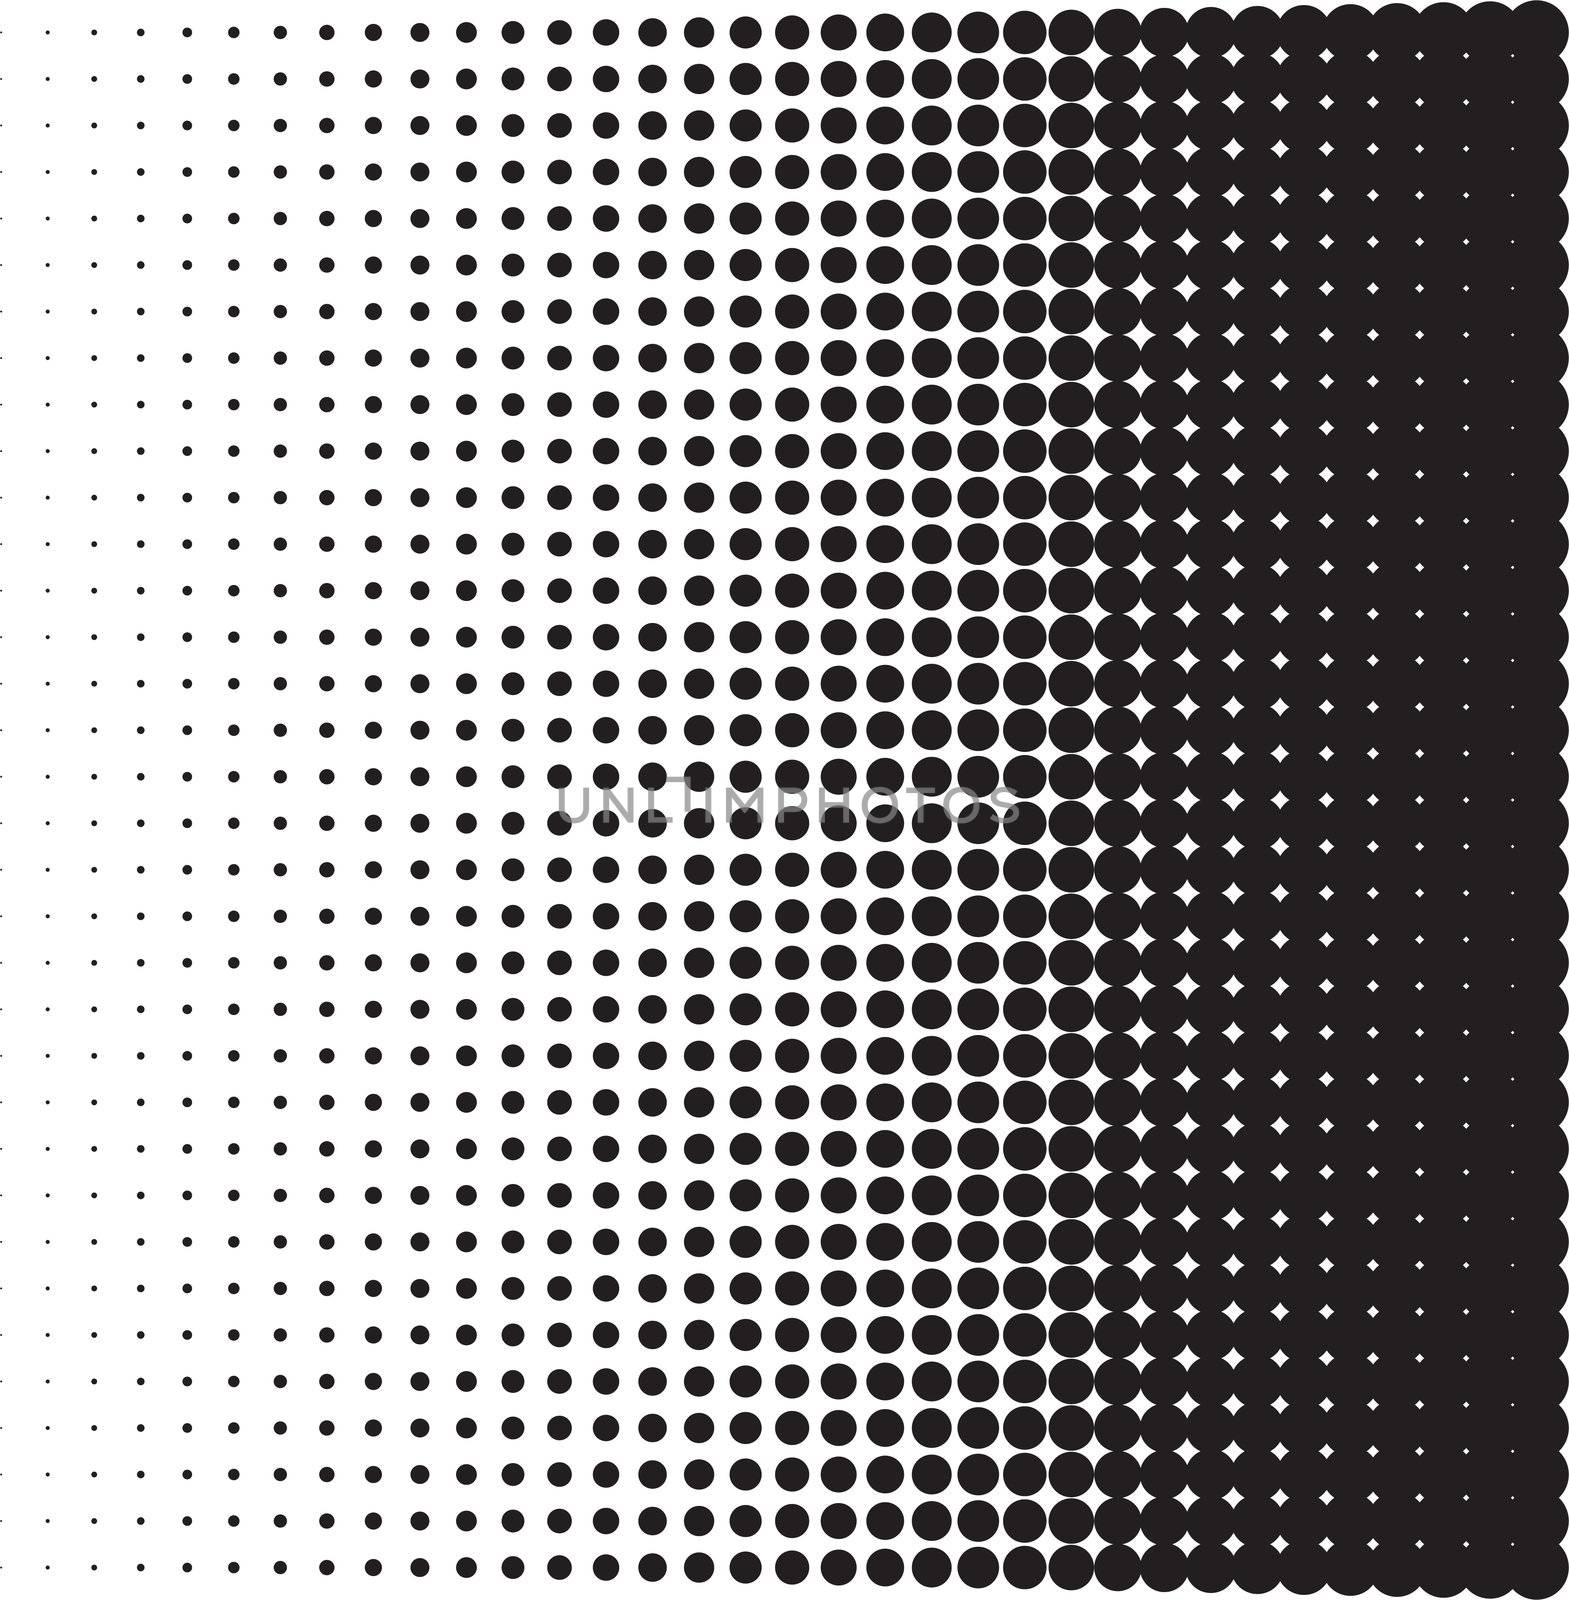 Halftone by jeremywhat